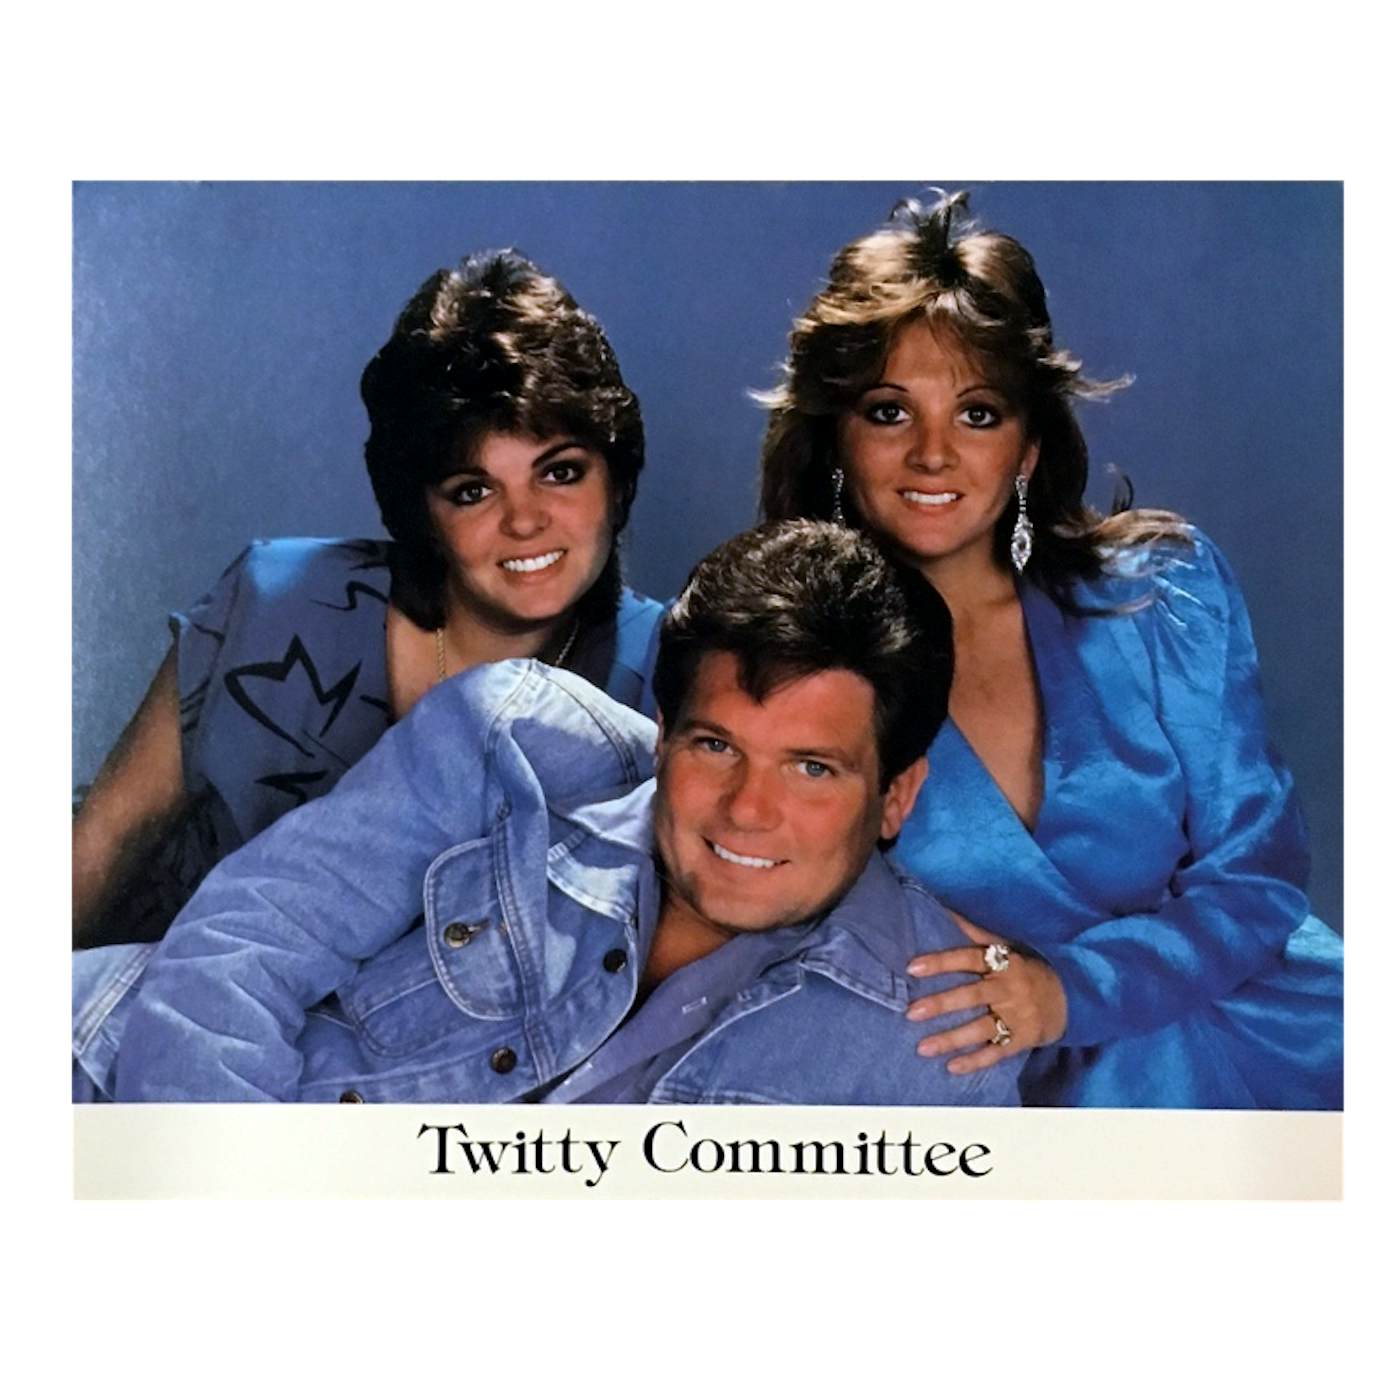 Conway Twitty Twitty Committee 8x10